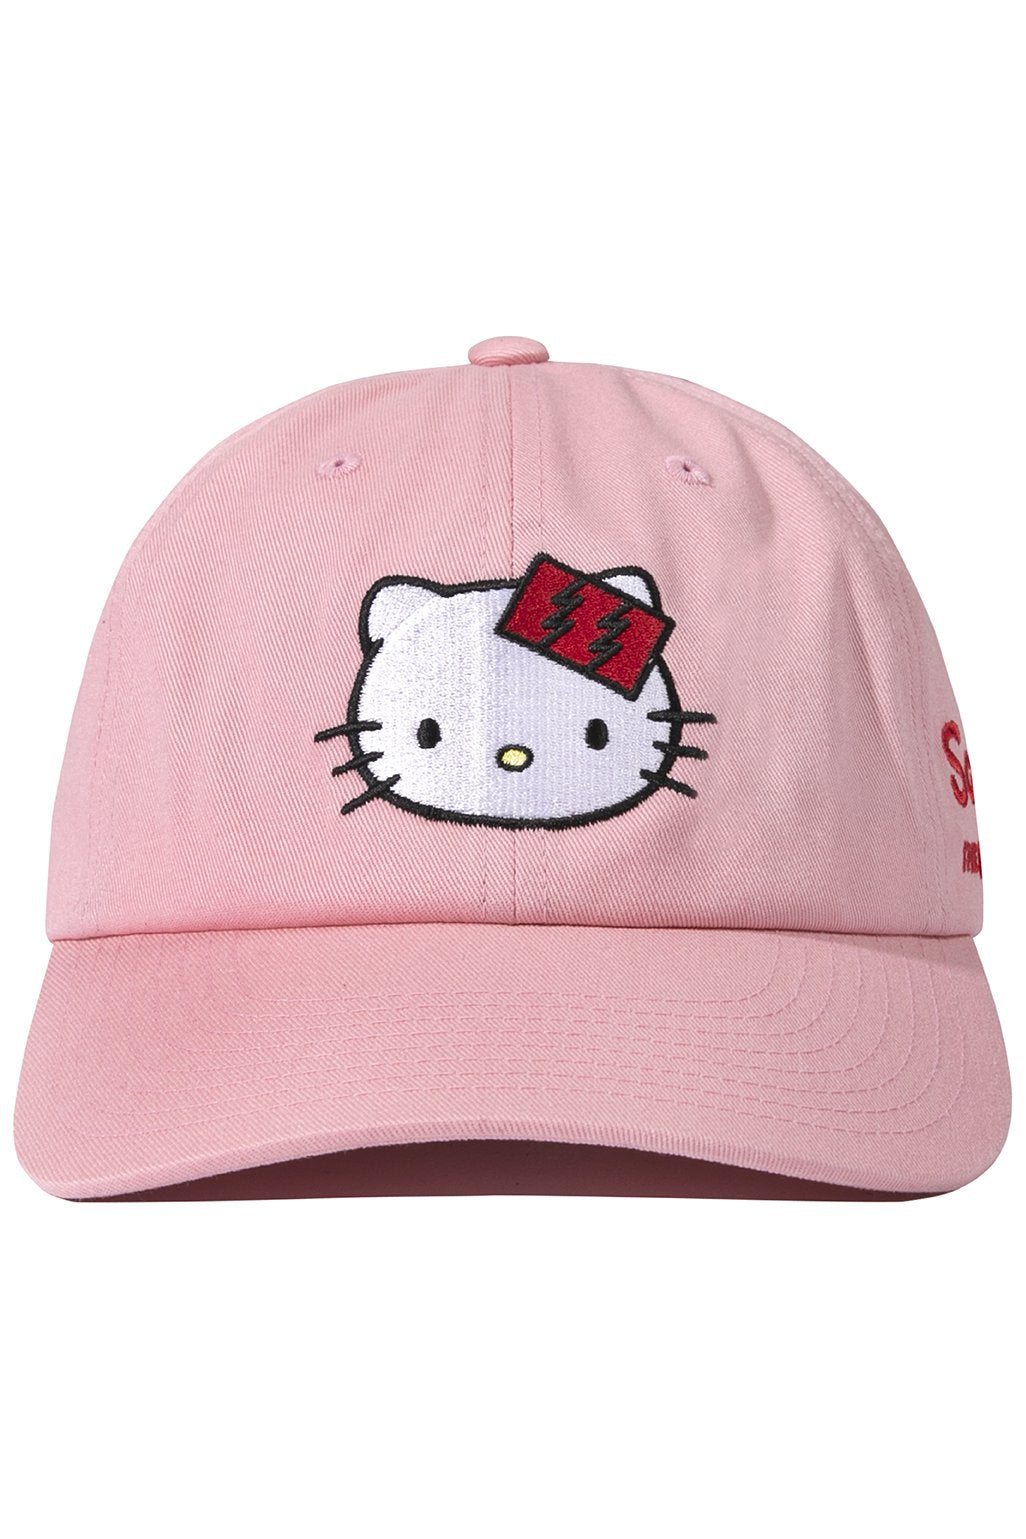 The Hundreds x Sanrio Hello Kitty Dad Hat in Pink